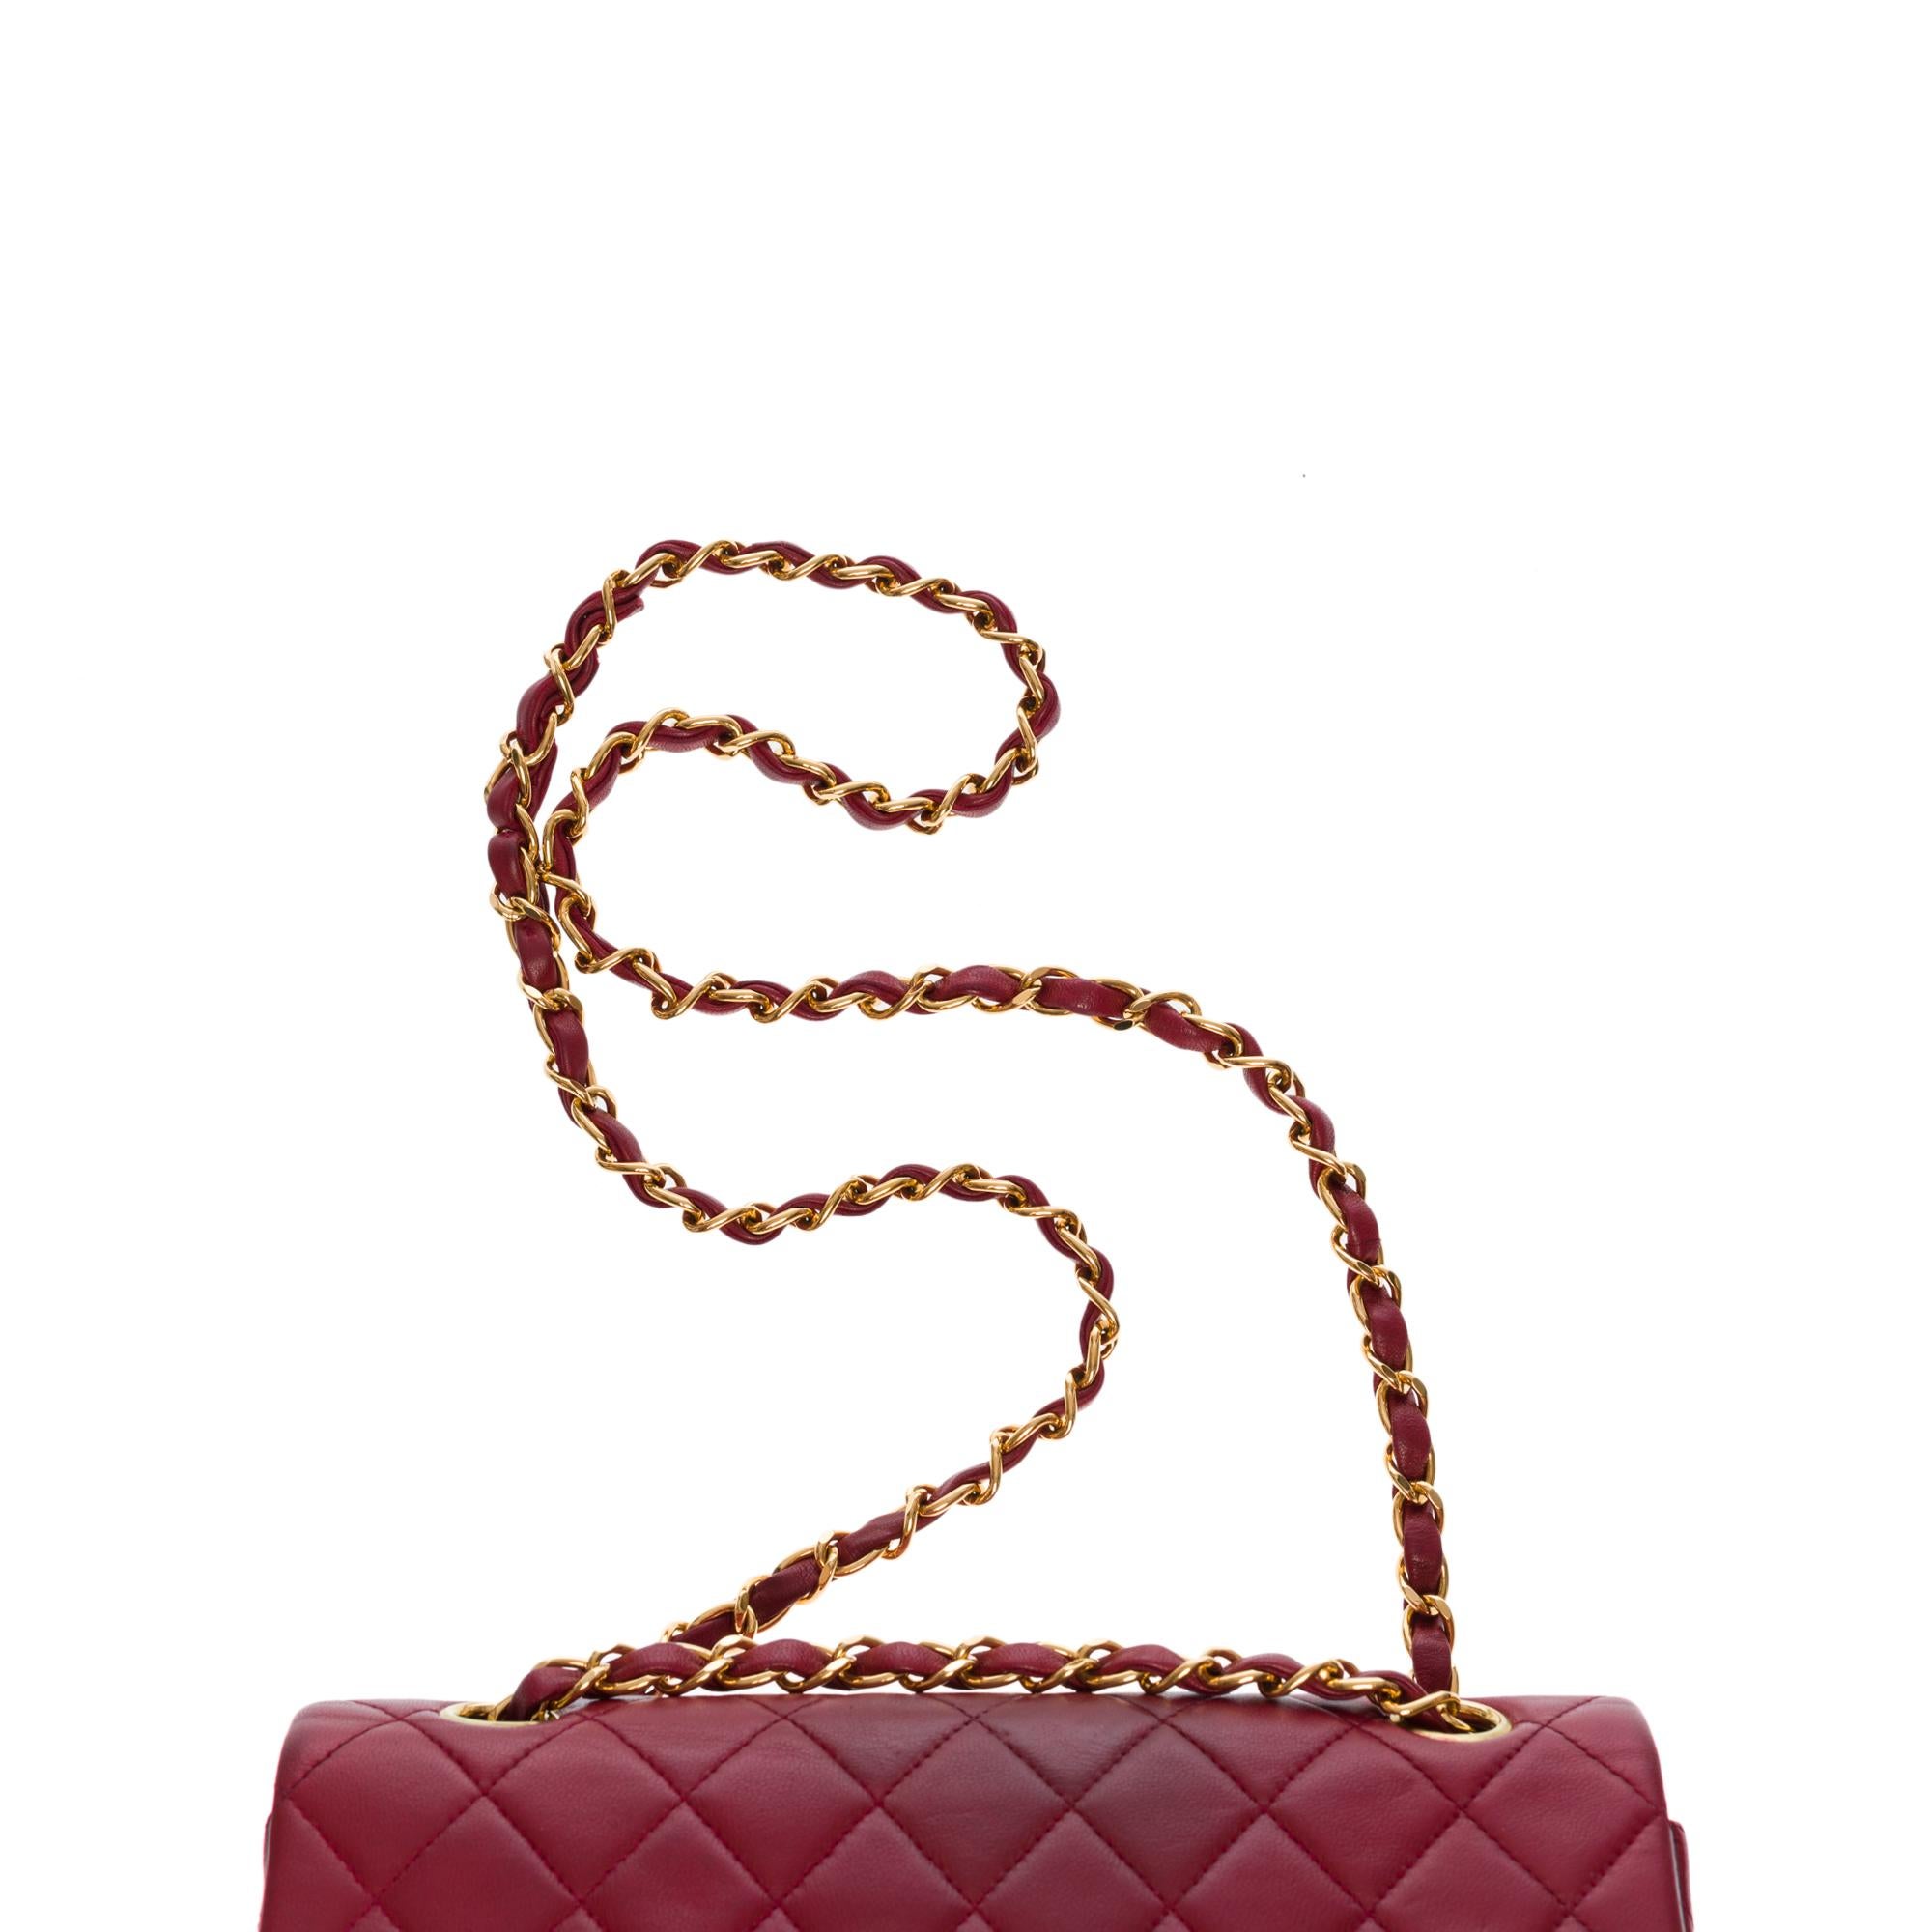 Chanel Timeless 23cm double flap Shoulder bag in red quilted lambskin, GHW 3